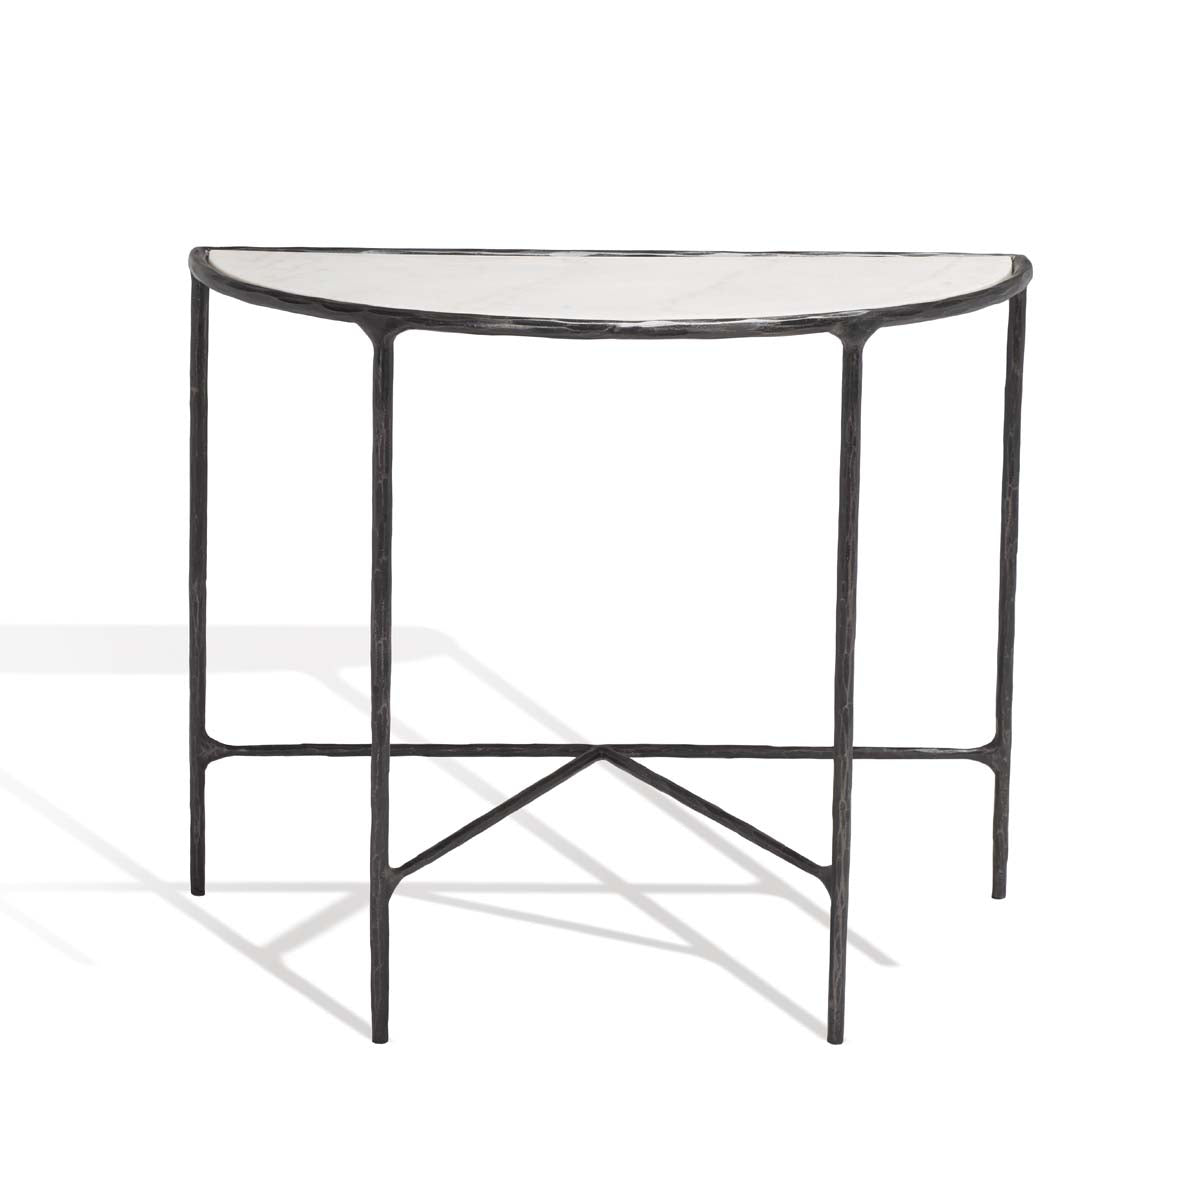 Safavieh Couture Jessa Forged Metal Console Tab - Black / White